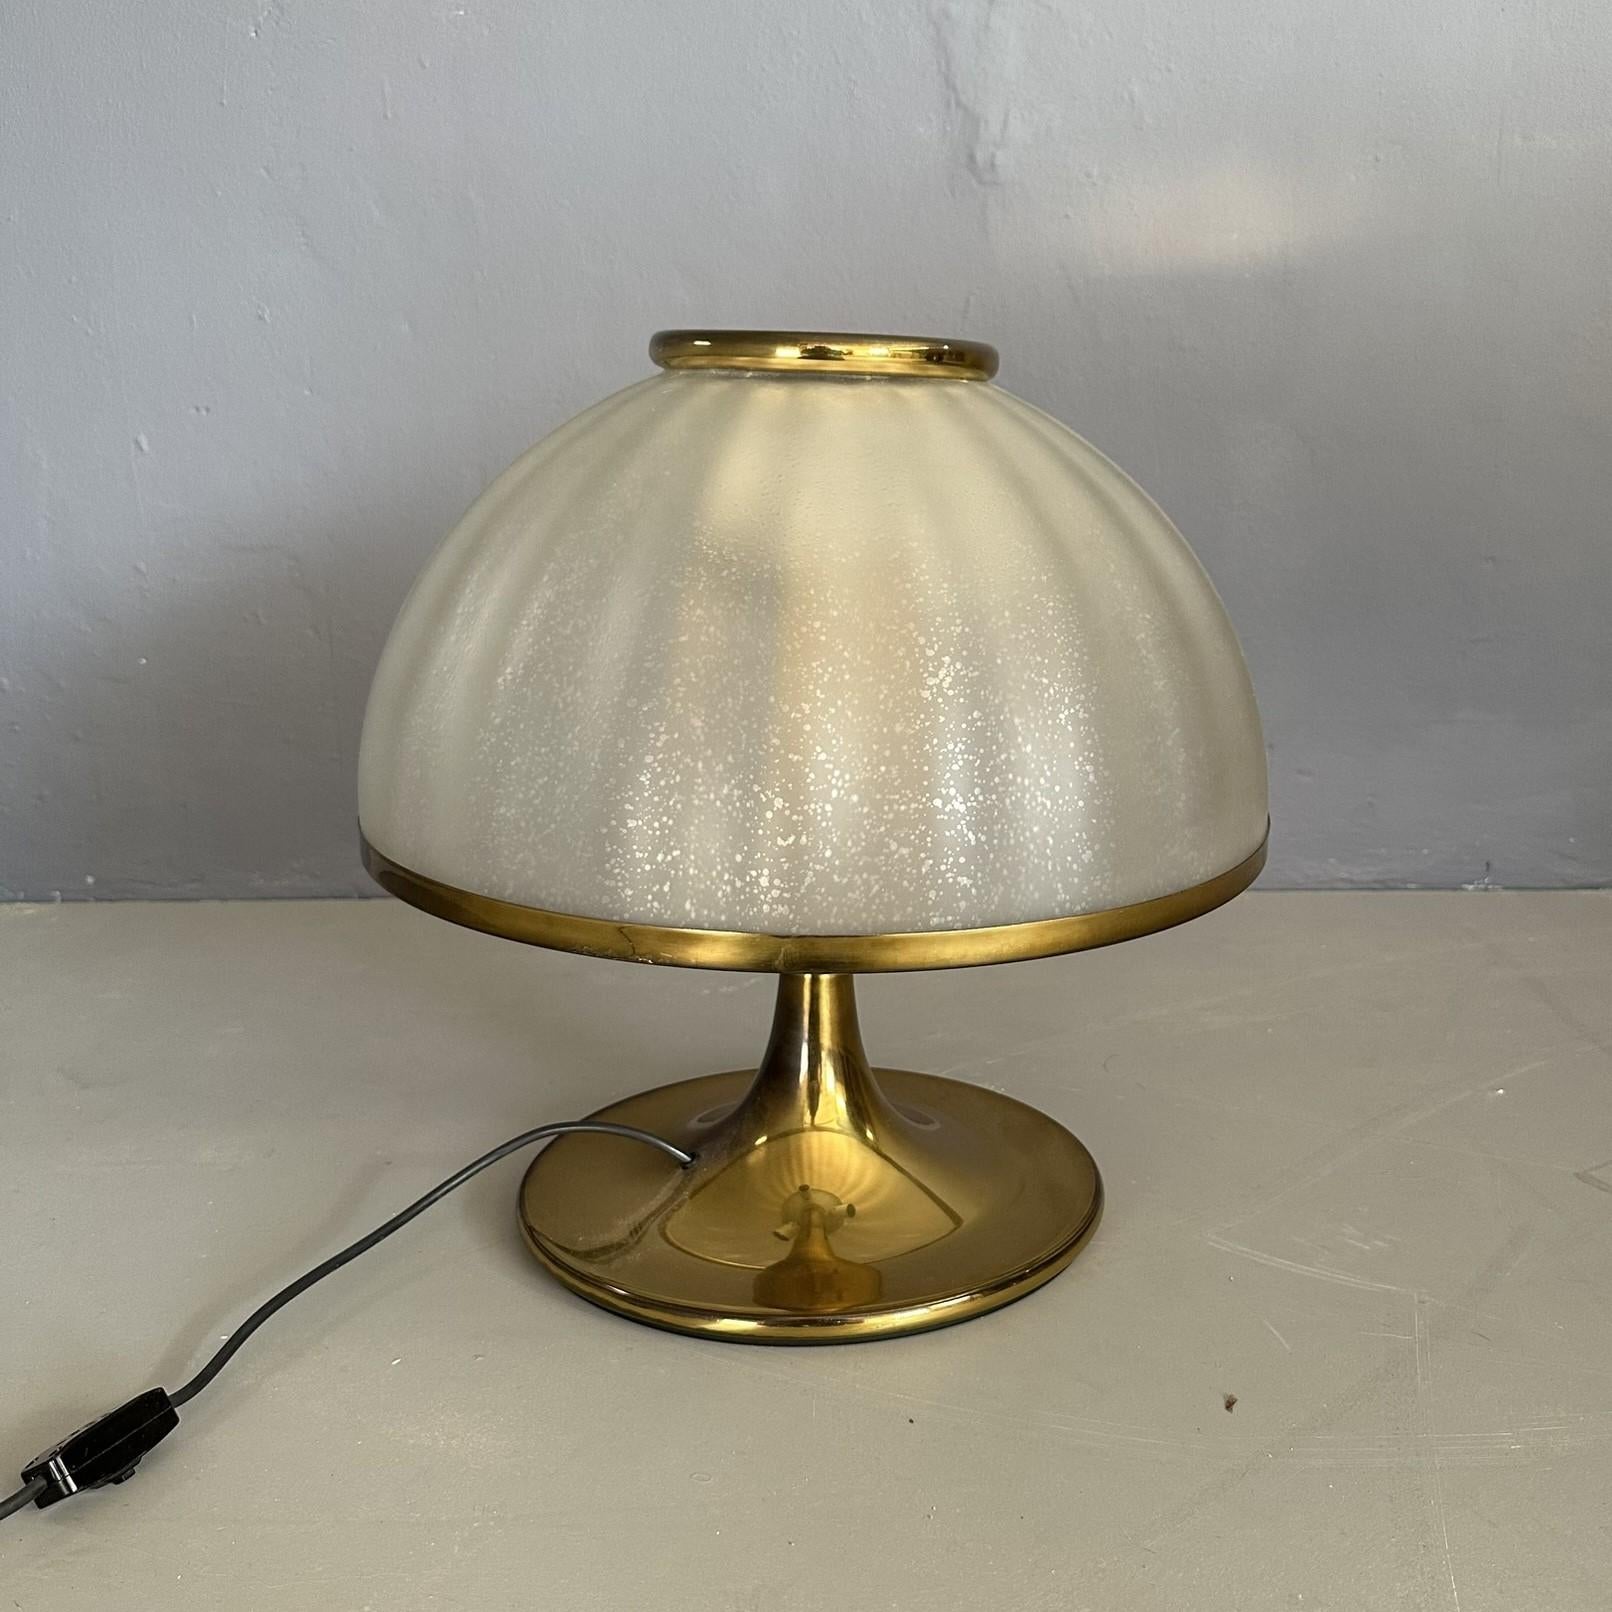 Mushroom table lamp, design by F. Fabbian, 1970s, Italian manufacturing.
The lamp has a polished brass base and stem, with a Murano glass lampshade.
The lampshade has brass elements that accompany the style of the base.
Height: 50cm
Diameter: